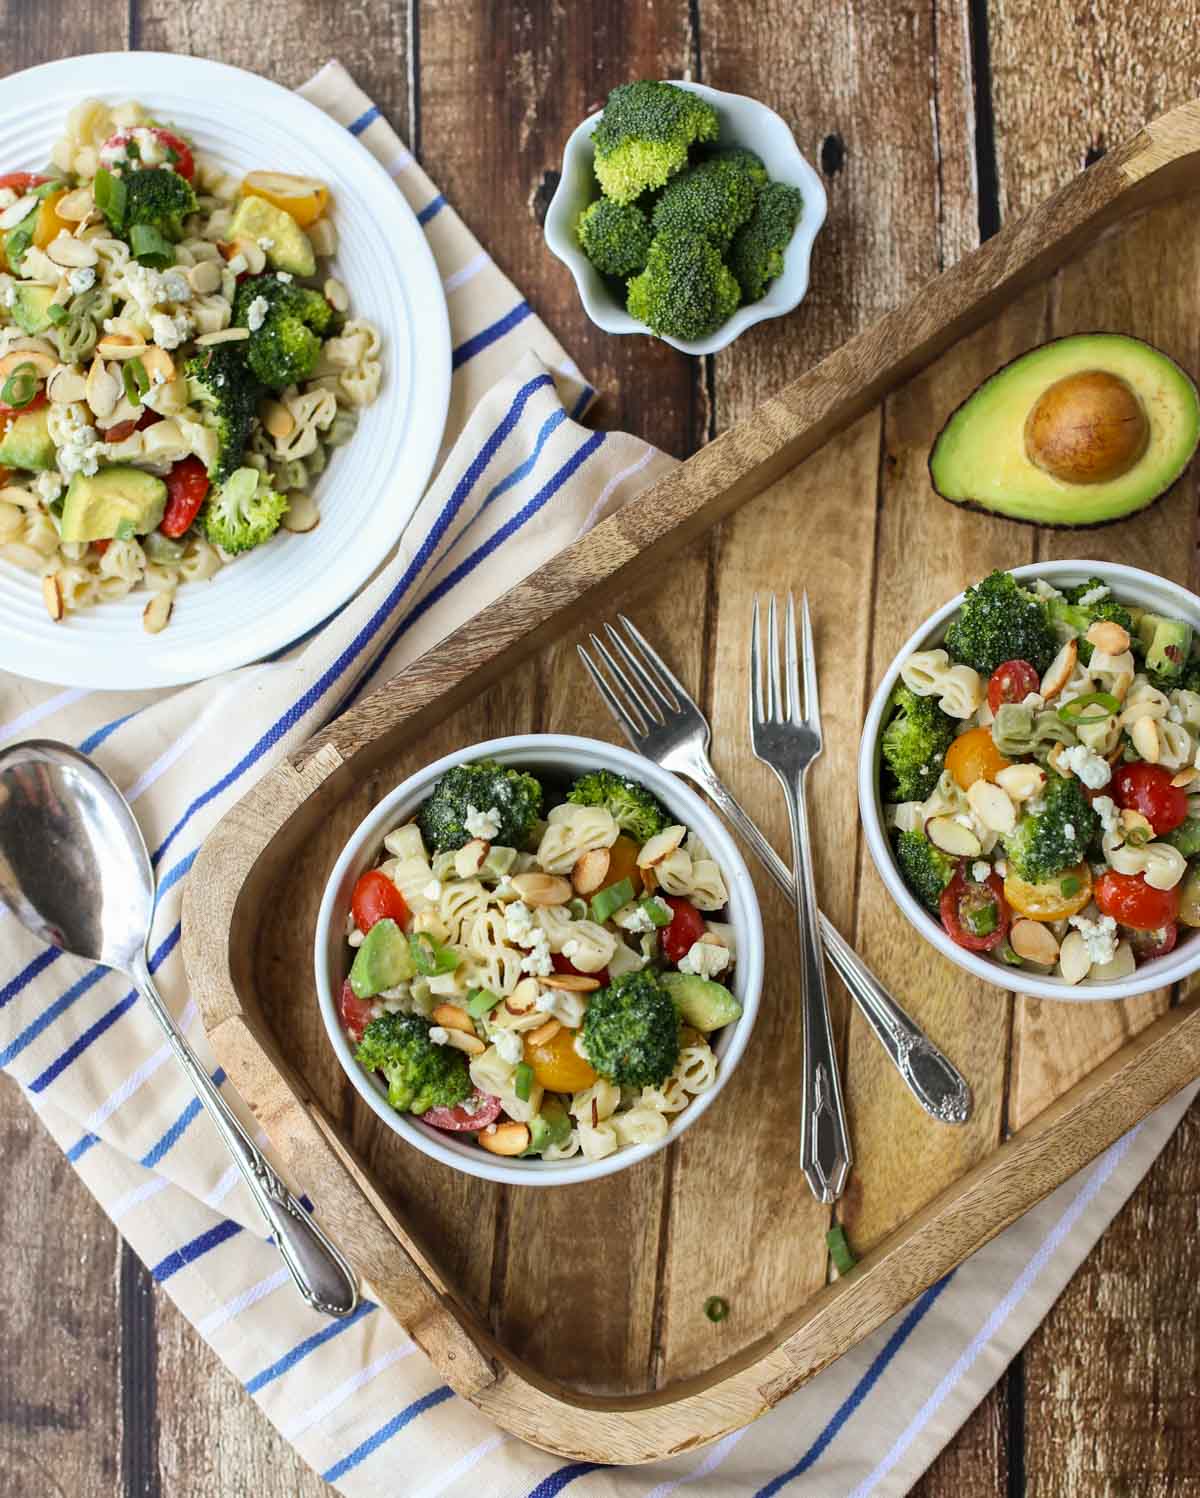 Blue Cheese Pasta Salad | Your favorite blue cheese veggies like cherry tomatoes and crunchy broccoli with toasted almonds and avocado! All tossed in a yummy blue cheese vinaigrette. Substitute feta for a lighter taste. Yum! | WorldofPastabilities.com